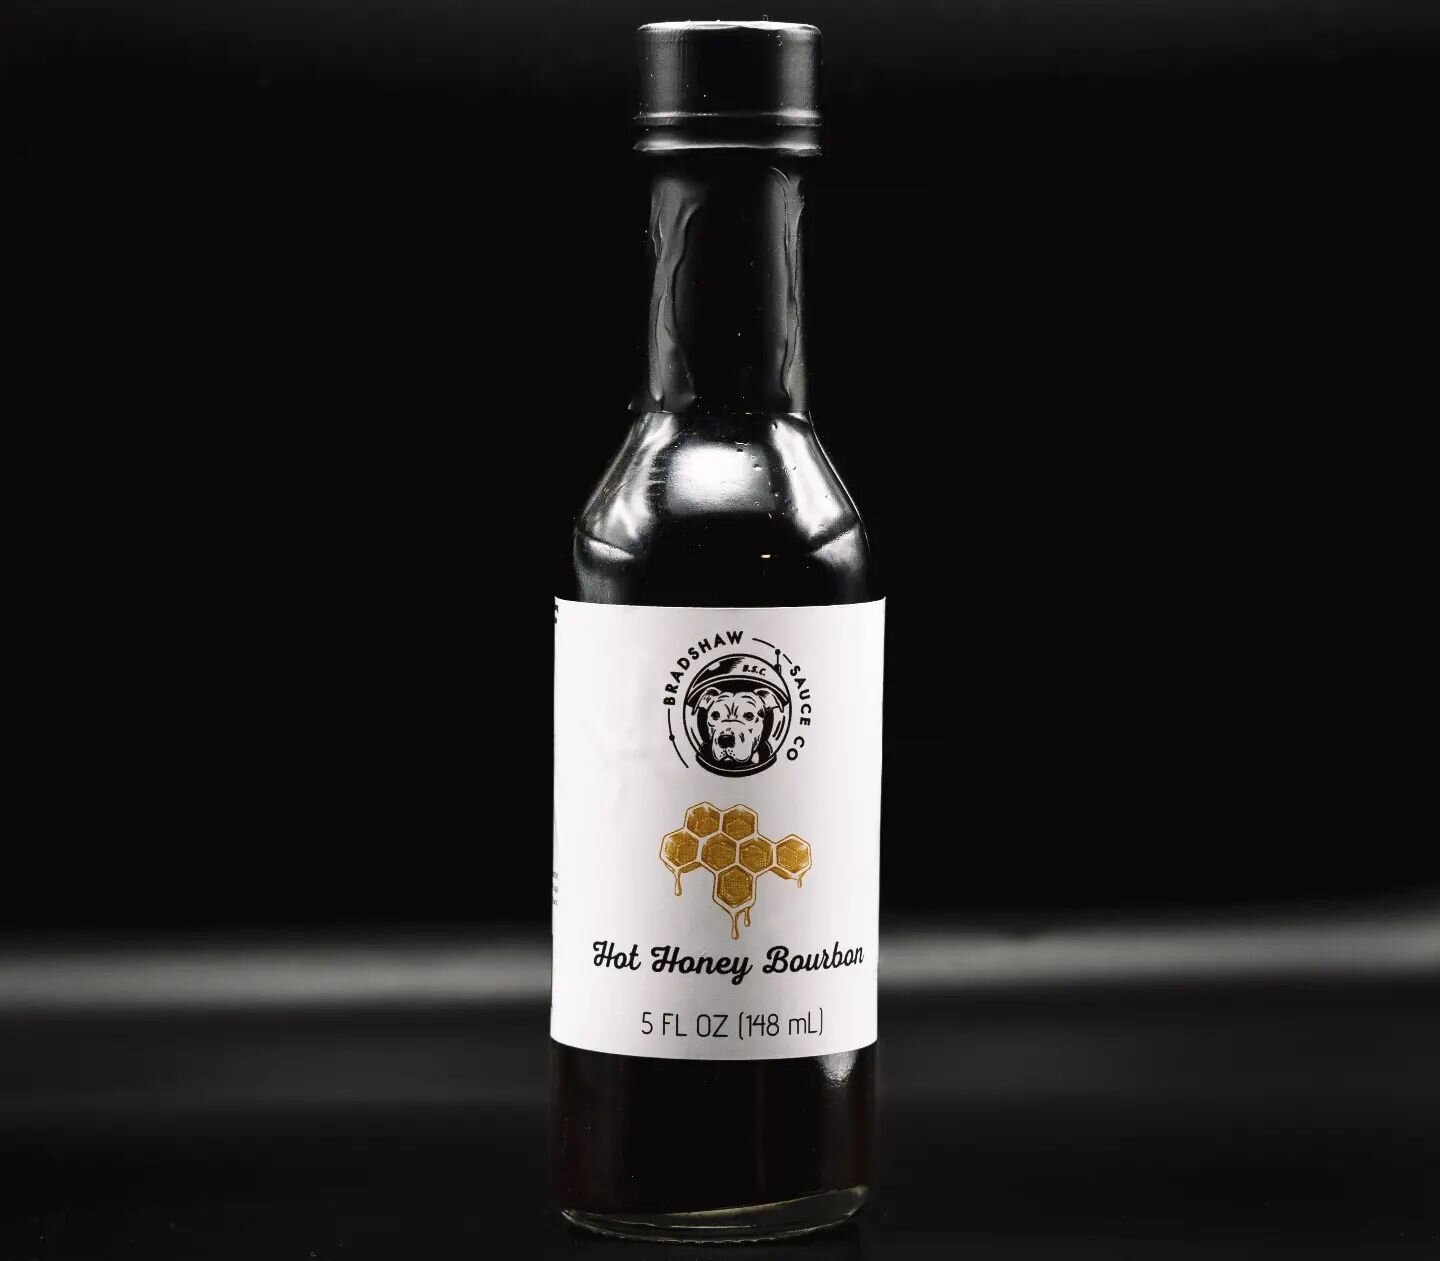 It's restocked! Our popular Hot Honey Bourbon will be at both markets tomorrow!